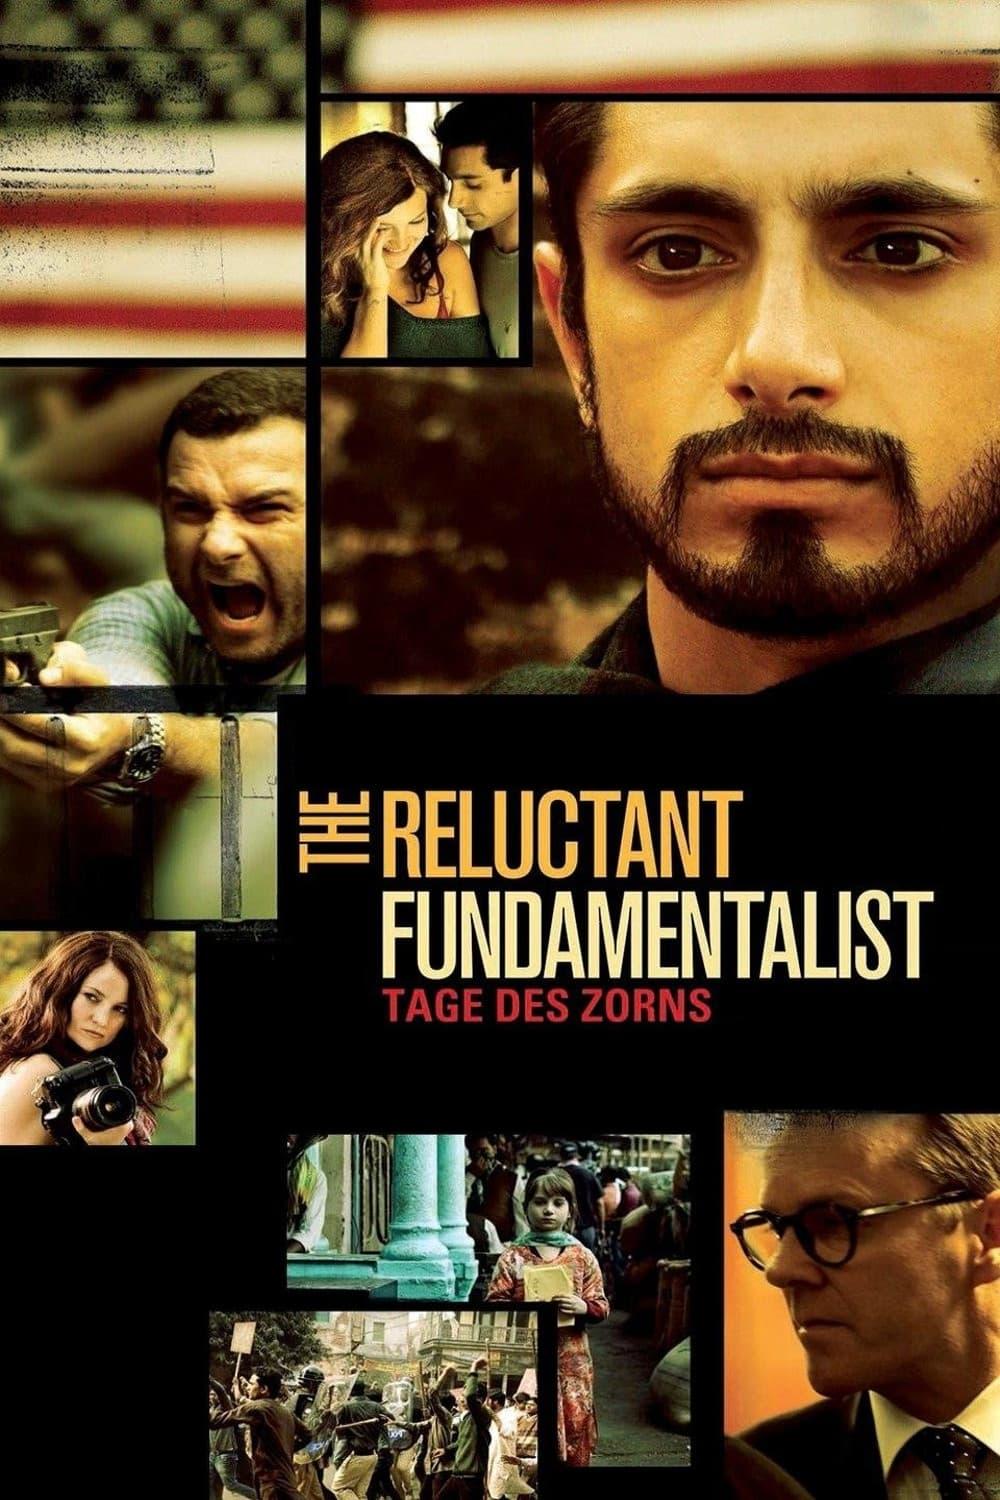 The Reluctant Fundamentalist - Tage des Zorns poster